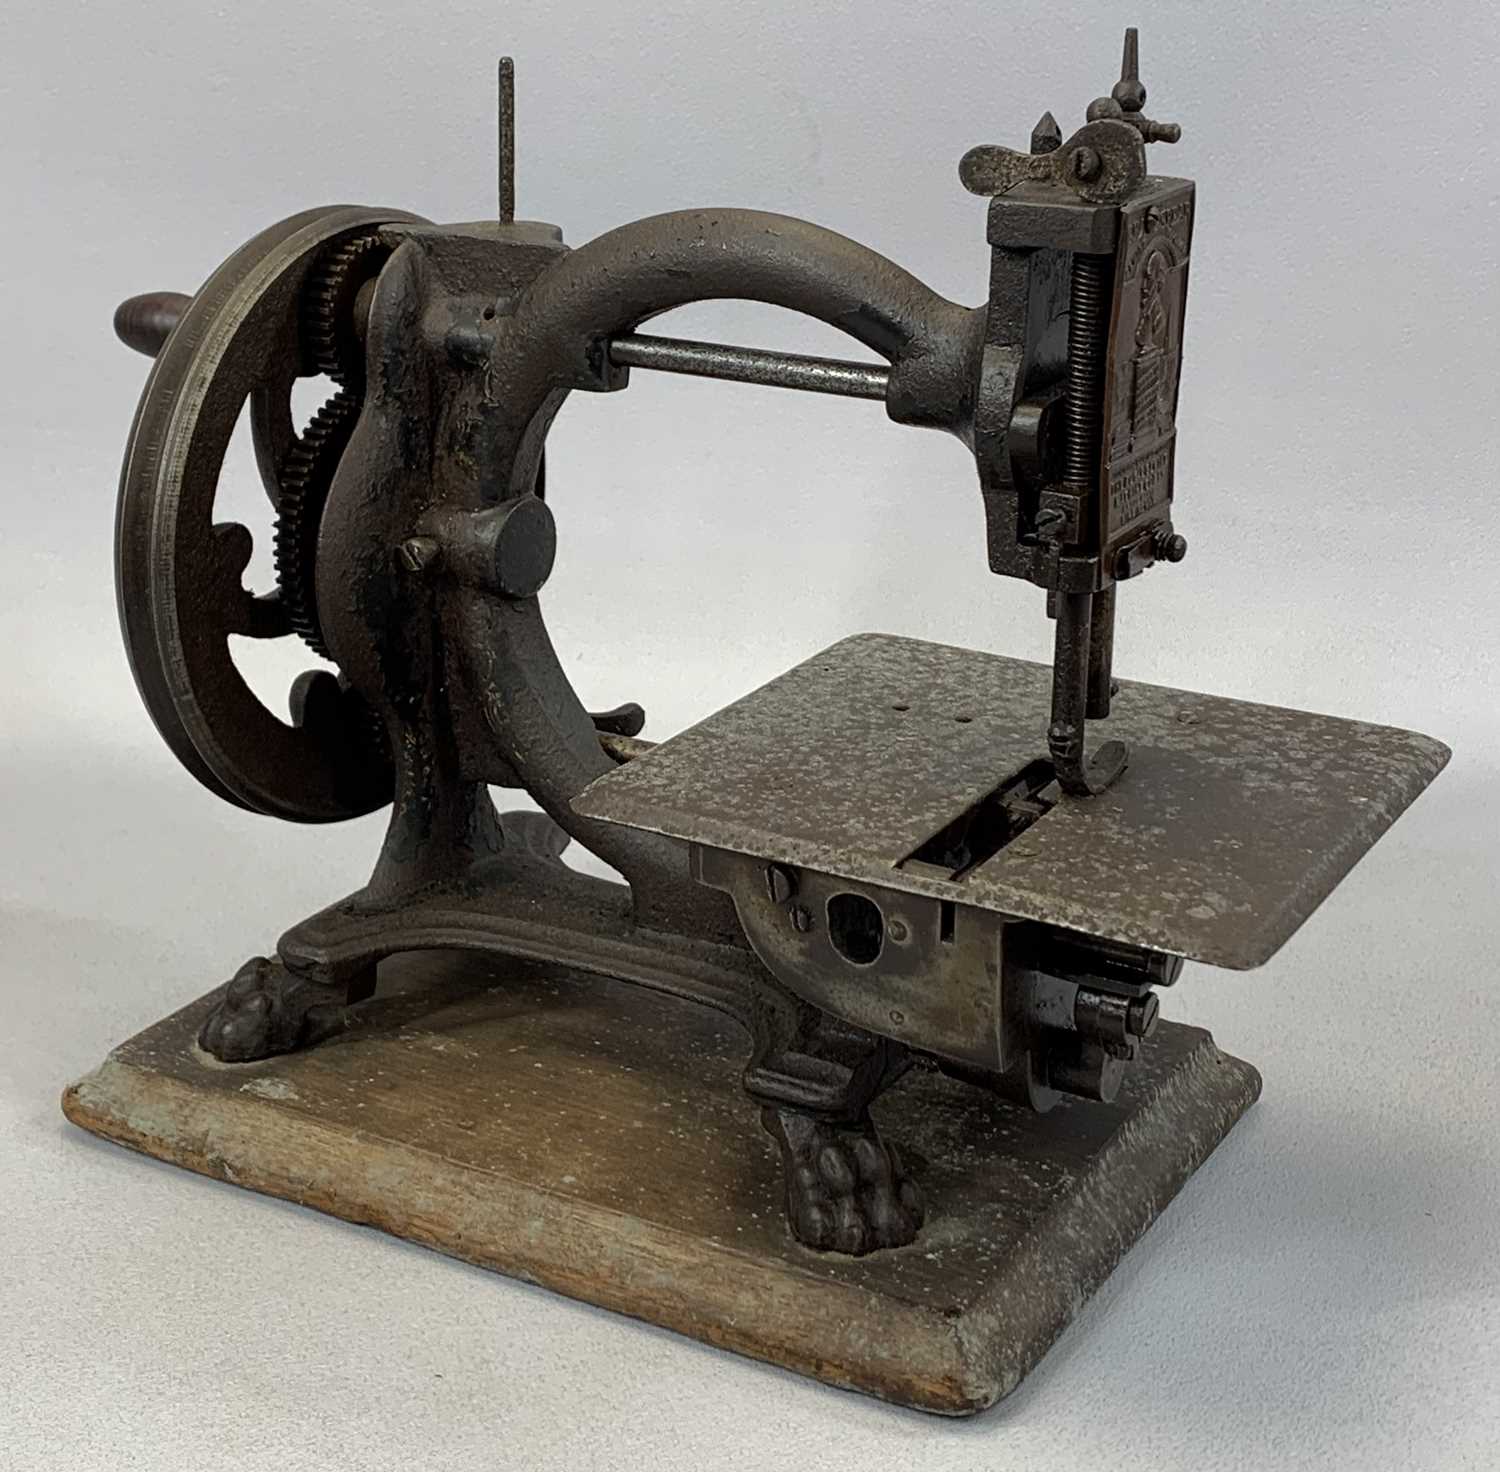 VICTORIAN SHAKESPEAR SEWING MACHINE, made by the Royal Sewing Machine Company, Birmingham, cast iron